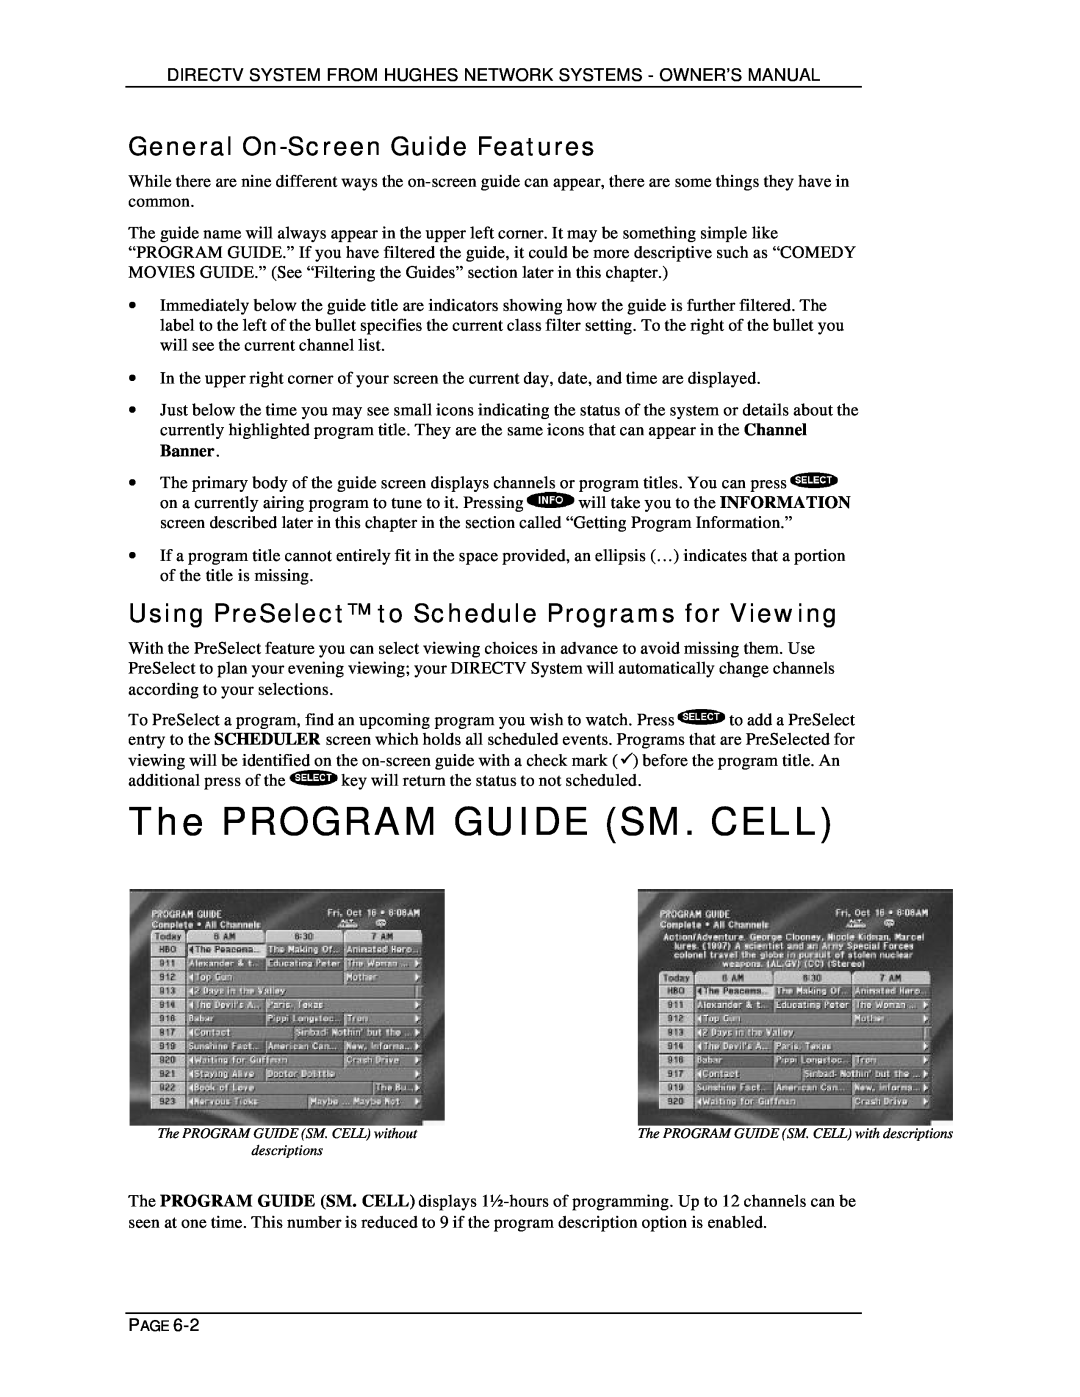 DirecTV HIRD-D01, HIRD-D11 owner manual The PROGRAM GUIDE SM. CELL, General On-ScreenGuide Features 